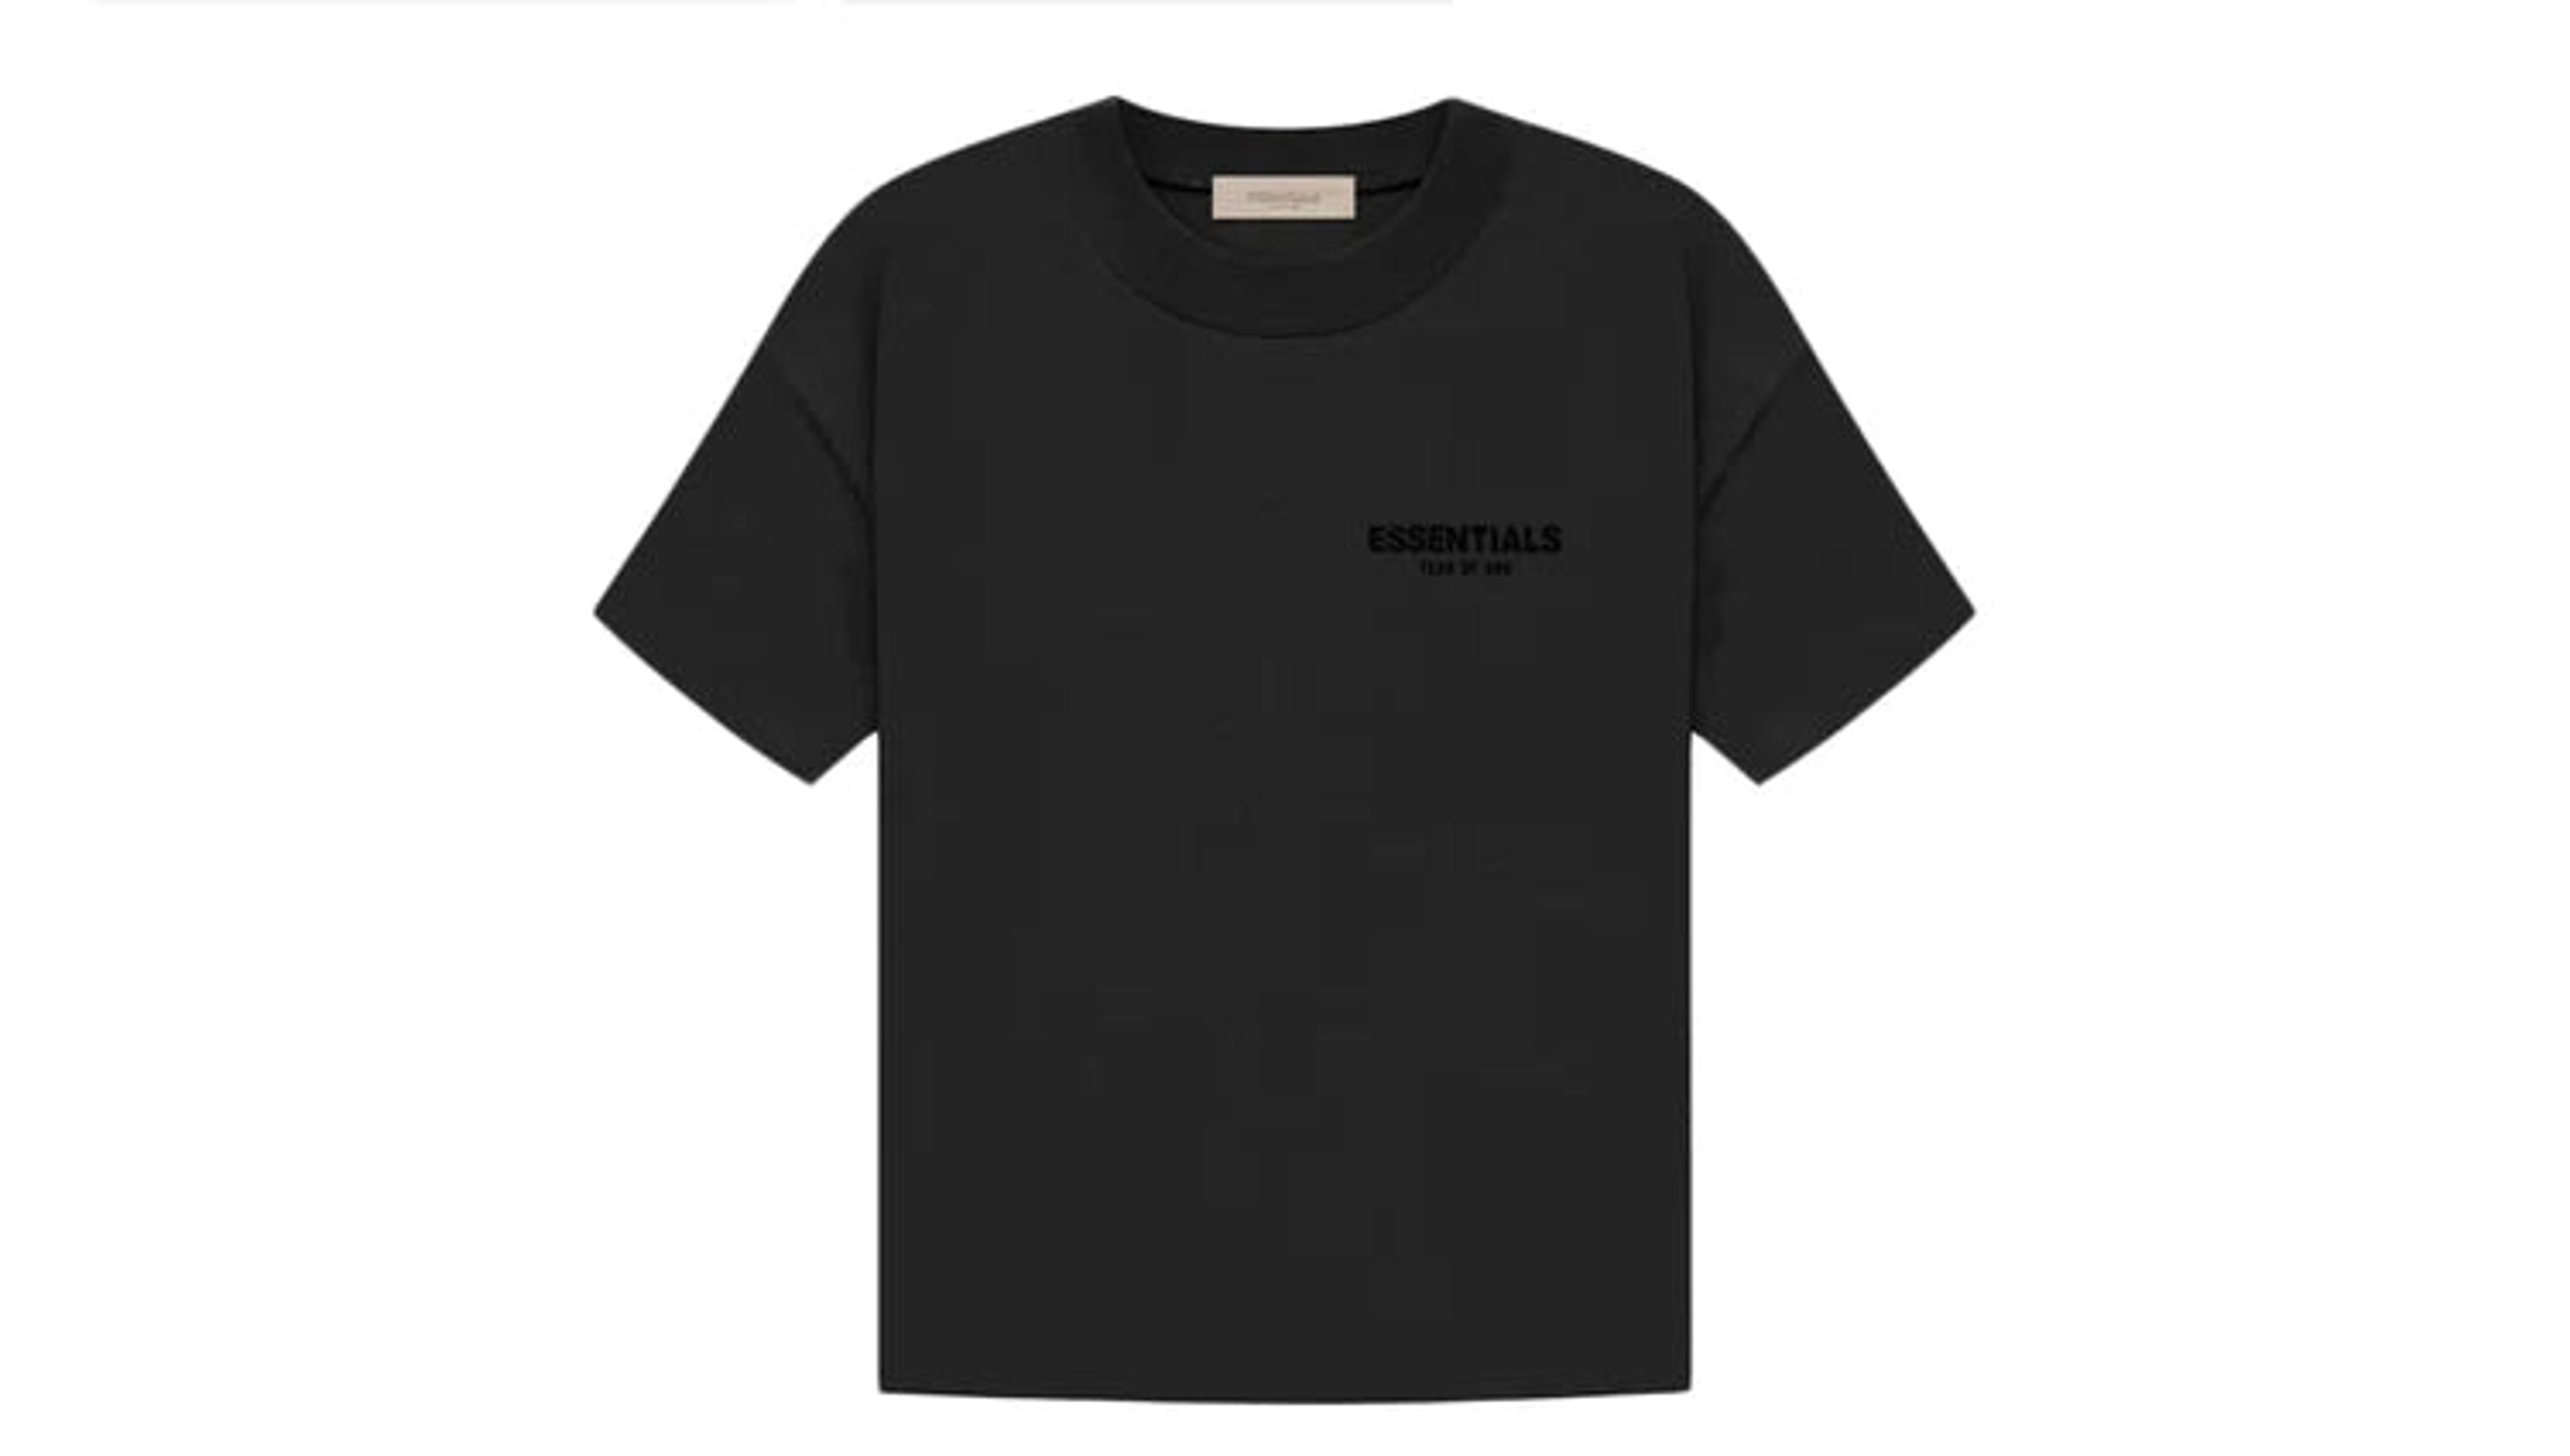 Alternate View 1 of Unreleased Fear Of God Essentials Black T-Shirt (2023)